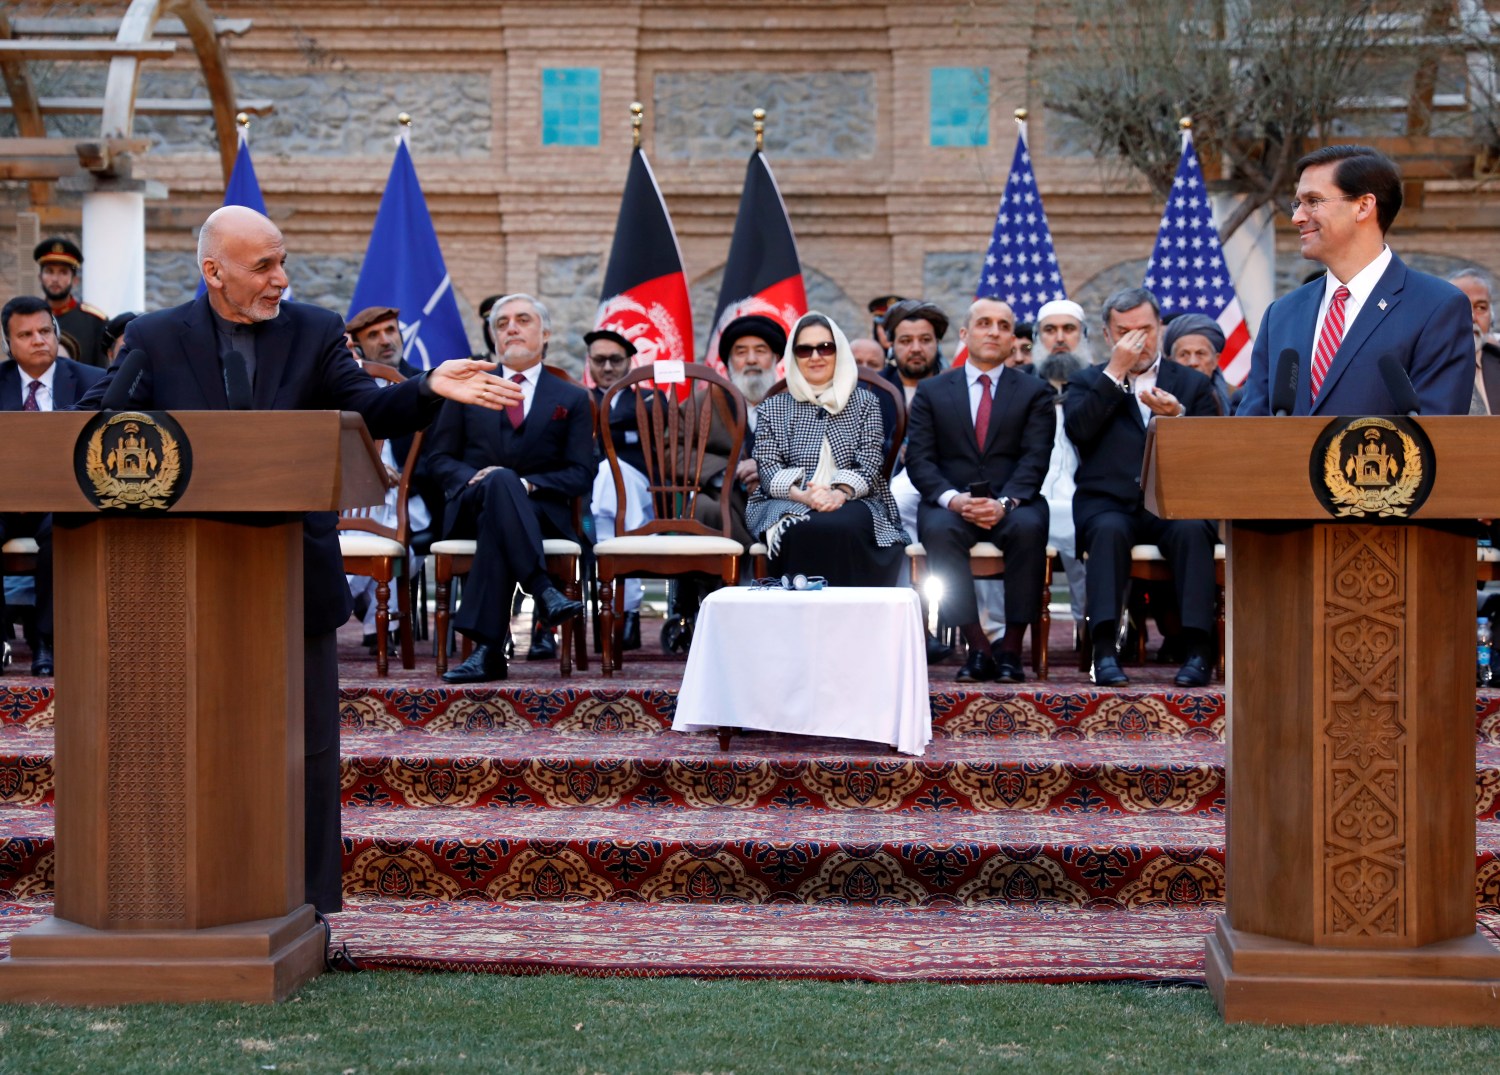 Afghanistan's President Ashraf Ghani speaks as U.S. Defense Secretary Mark Esper looks on during a news conference in Kabul, Afghanistan February 29, 2020.REUTERS/Mohammad Ismail